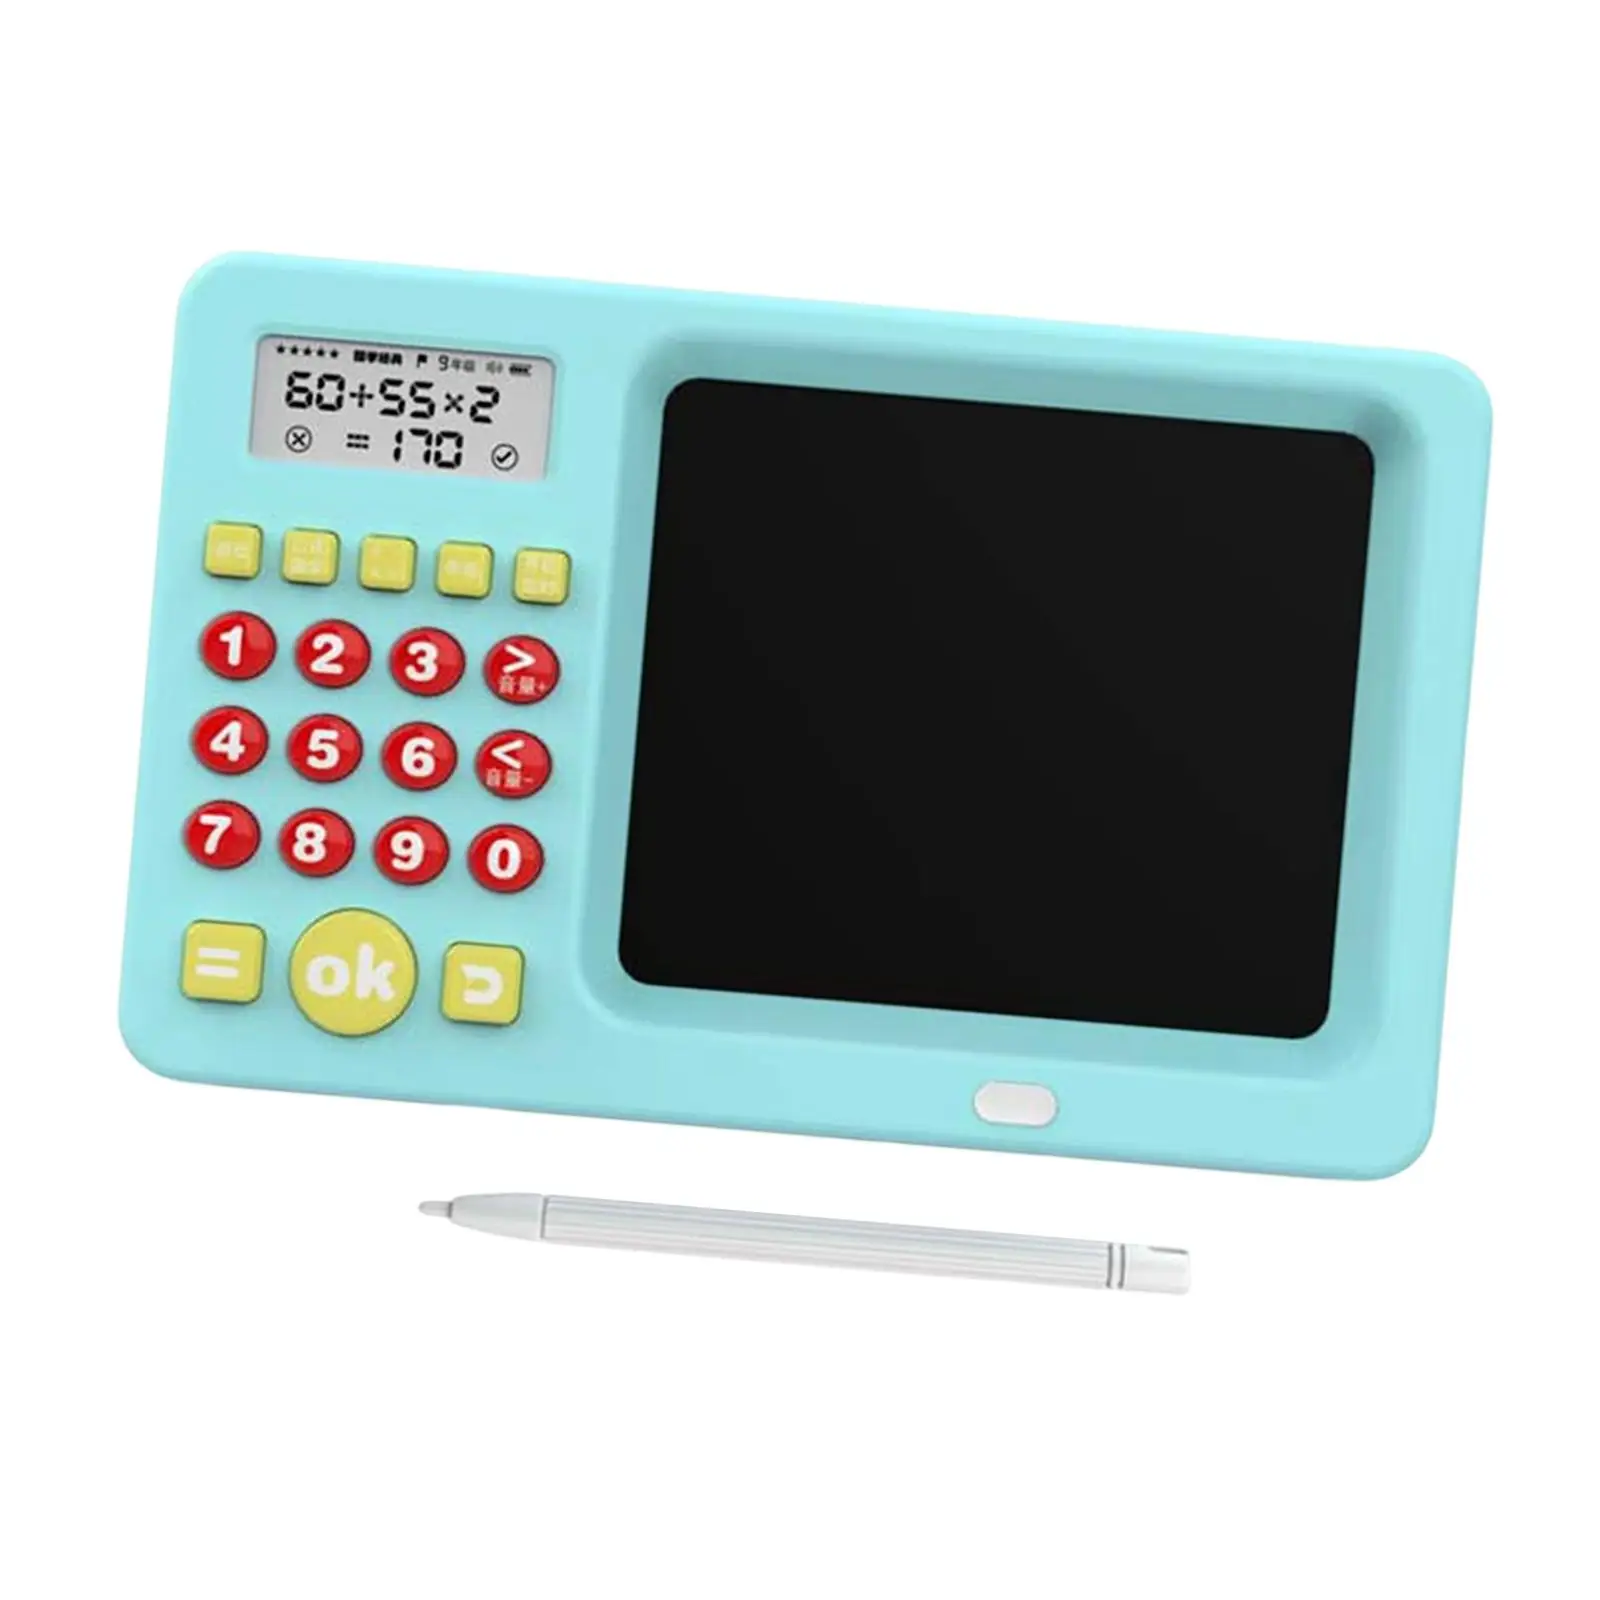 Mouth Calculator Children`s Education Functional Math Calculation Children`s Mathematics Training Machine Girls Toddlers Baby